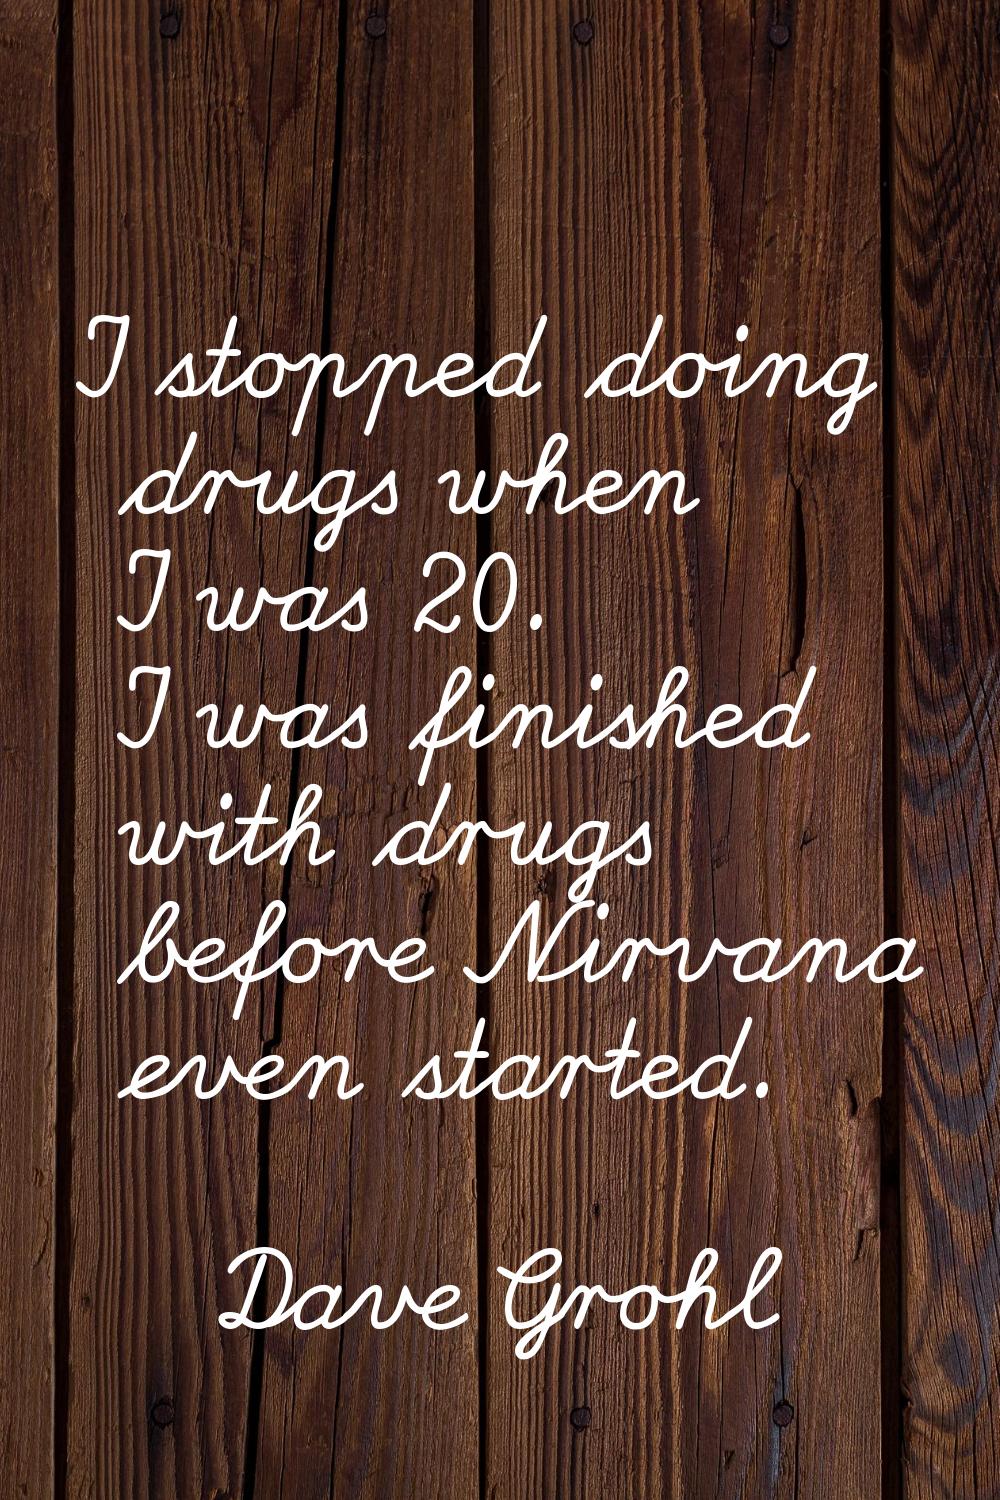 I stopped doing drugs when I was 20. I was finished with drugs before Nirvana even started.